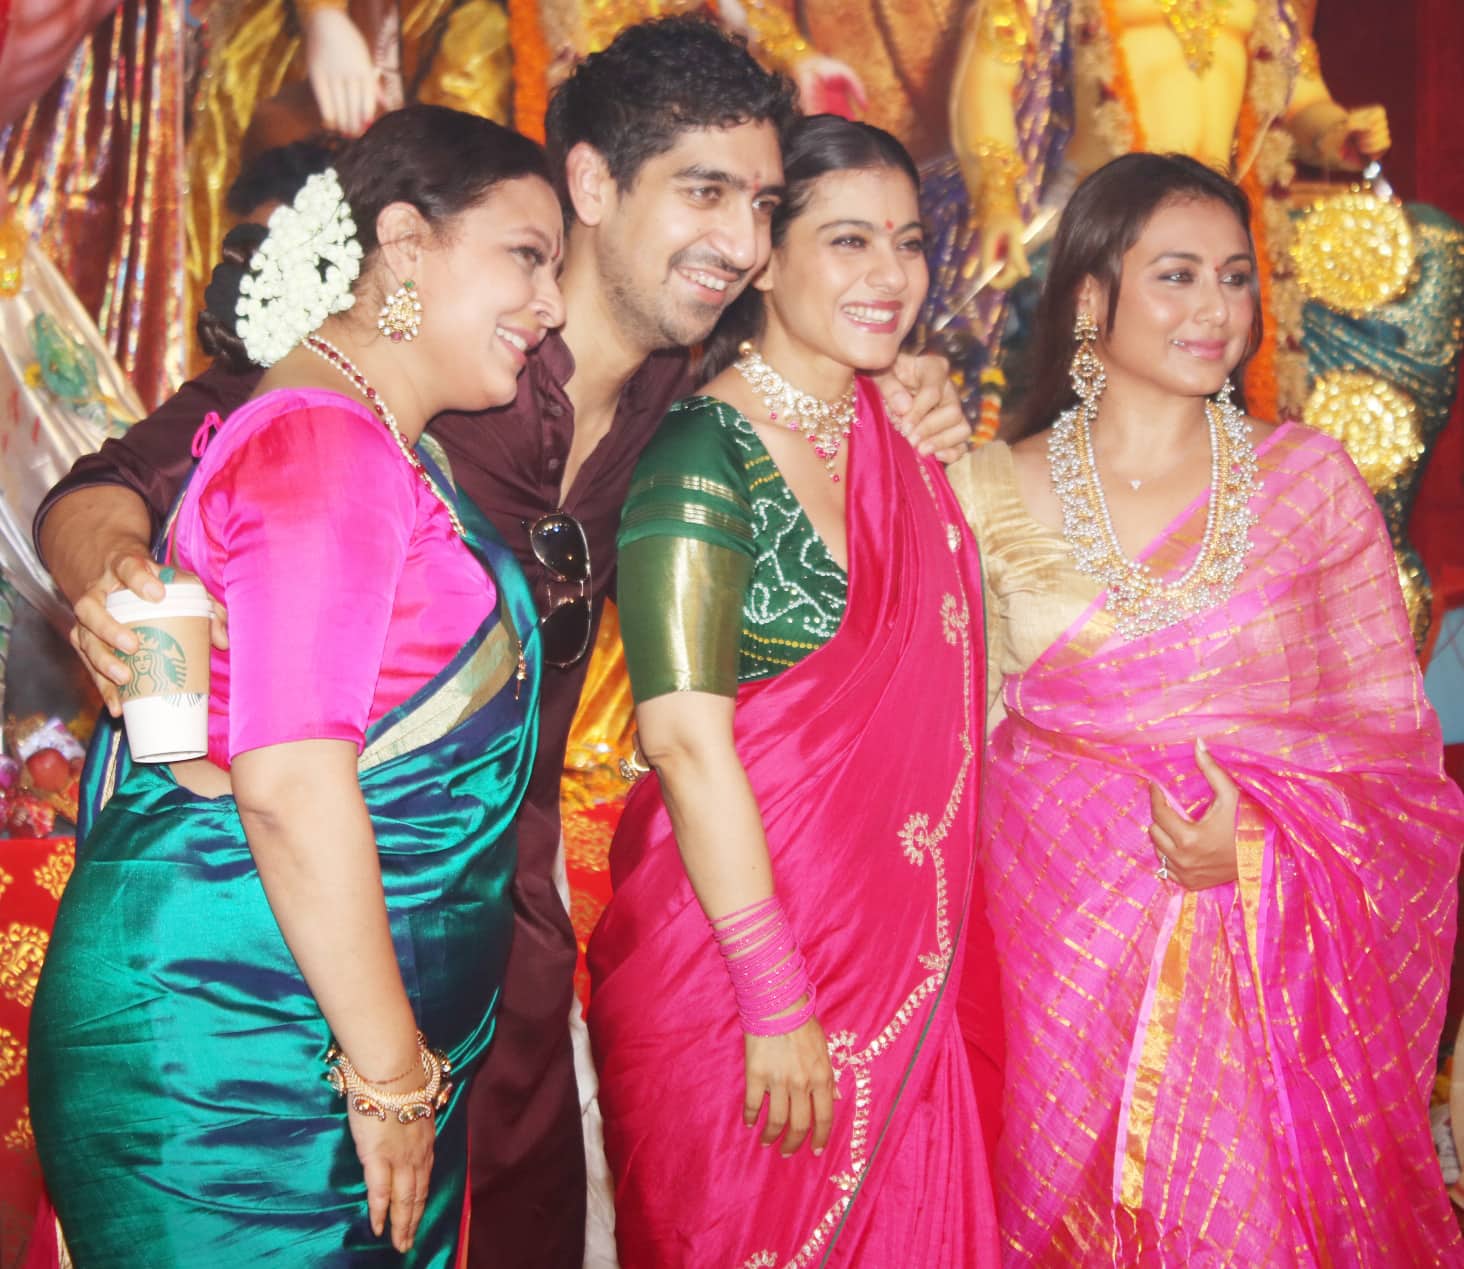 Ayan with his actress sisters